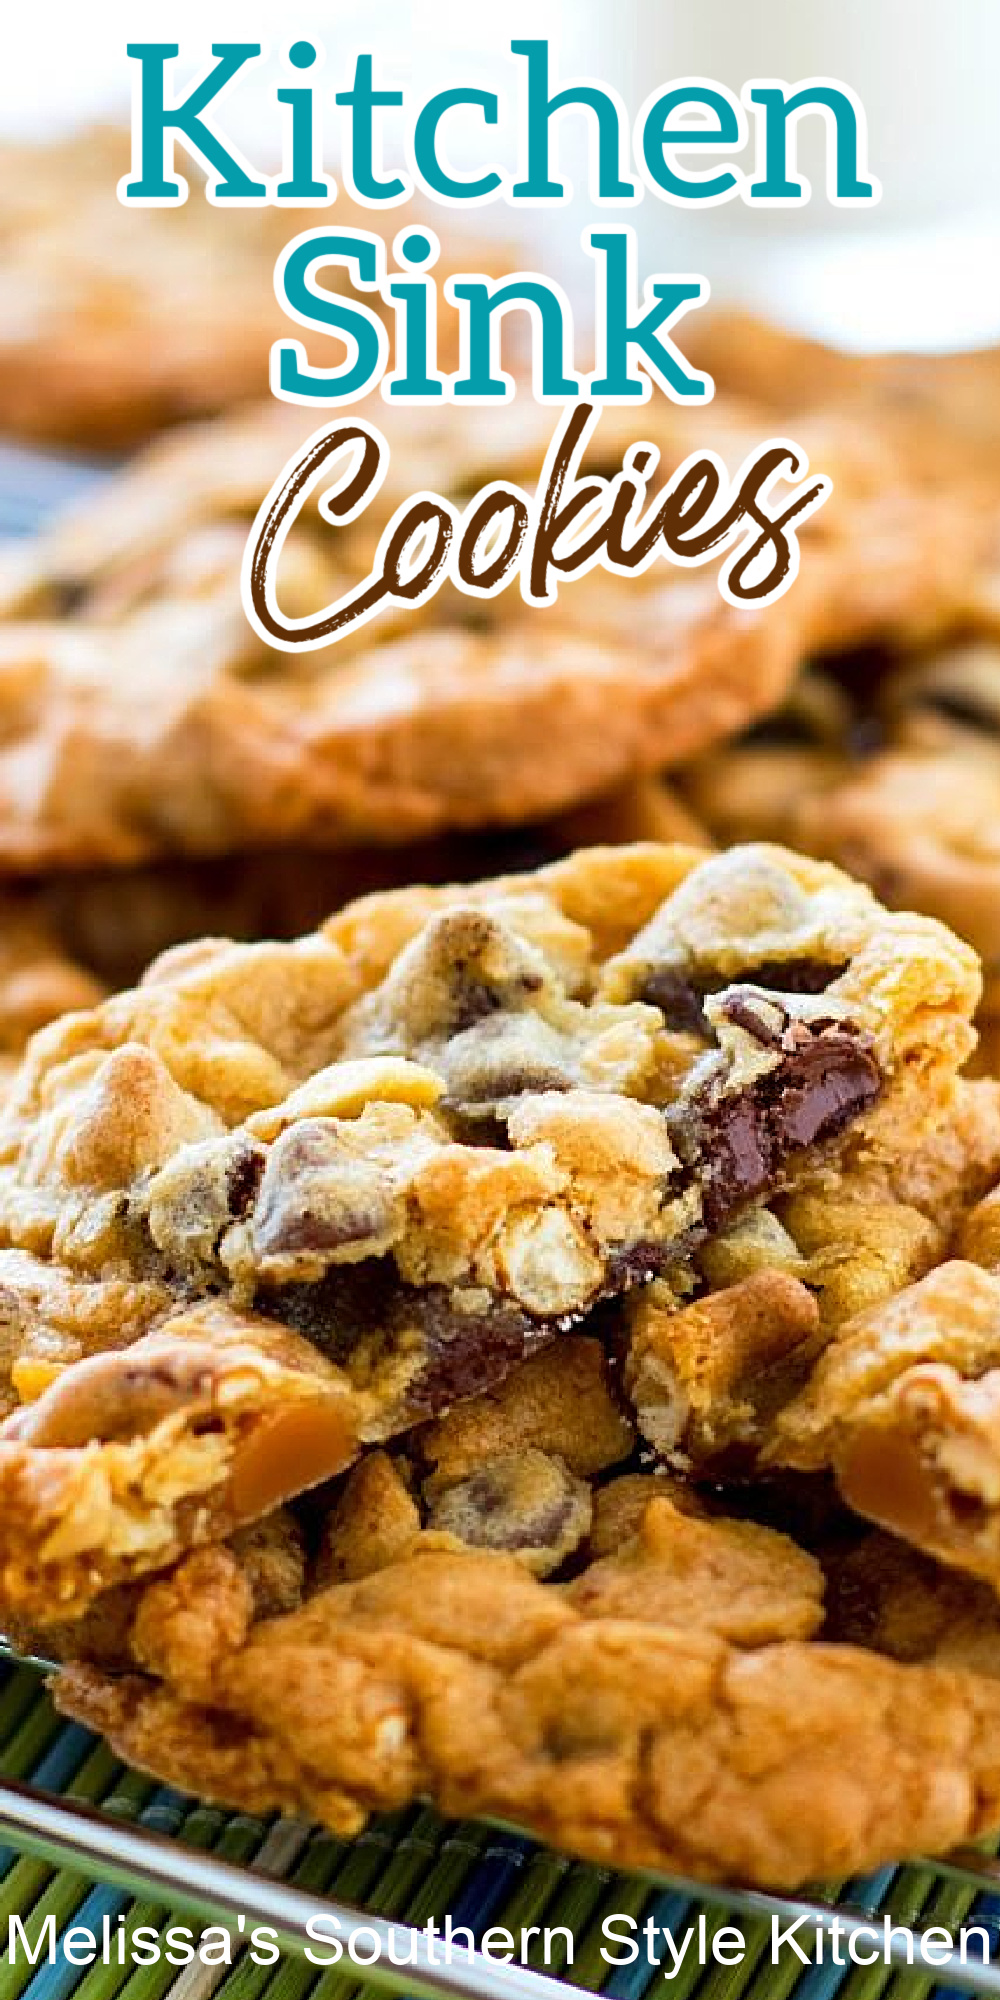 These sweet and salty Kitchen Sink Cookies are fully loaded with chocolate and peanut butter chips, peanuts, caramel bits and pretzels #kitchensinkcookies #cookies #cookierecipes #chocolatechipcookies #sweets #christmascookies #holidaybaking #holidays #desserts #dessertfoodrecipes #southernfood #southernrecipes